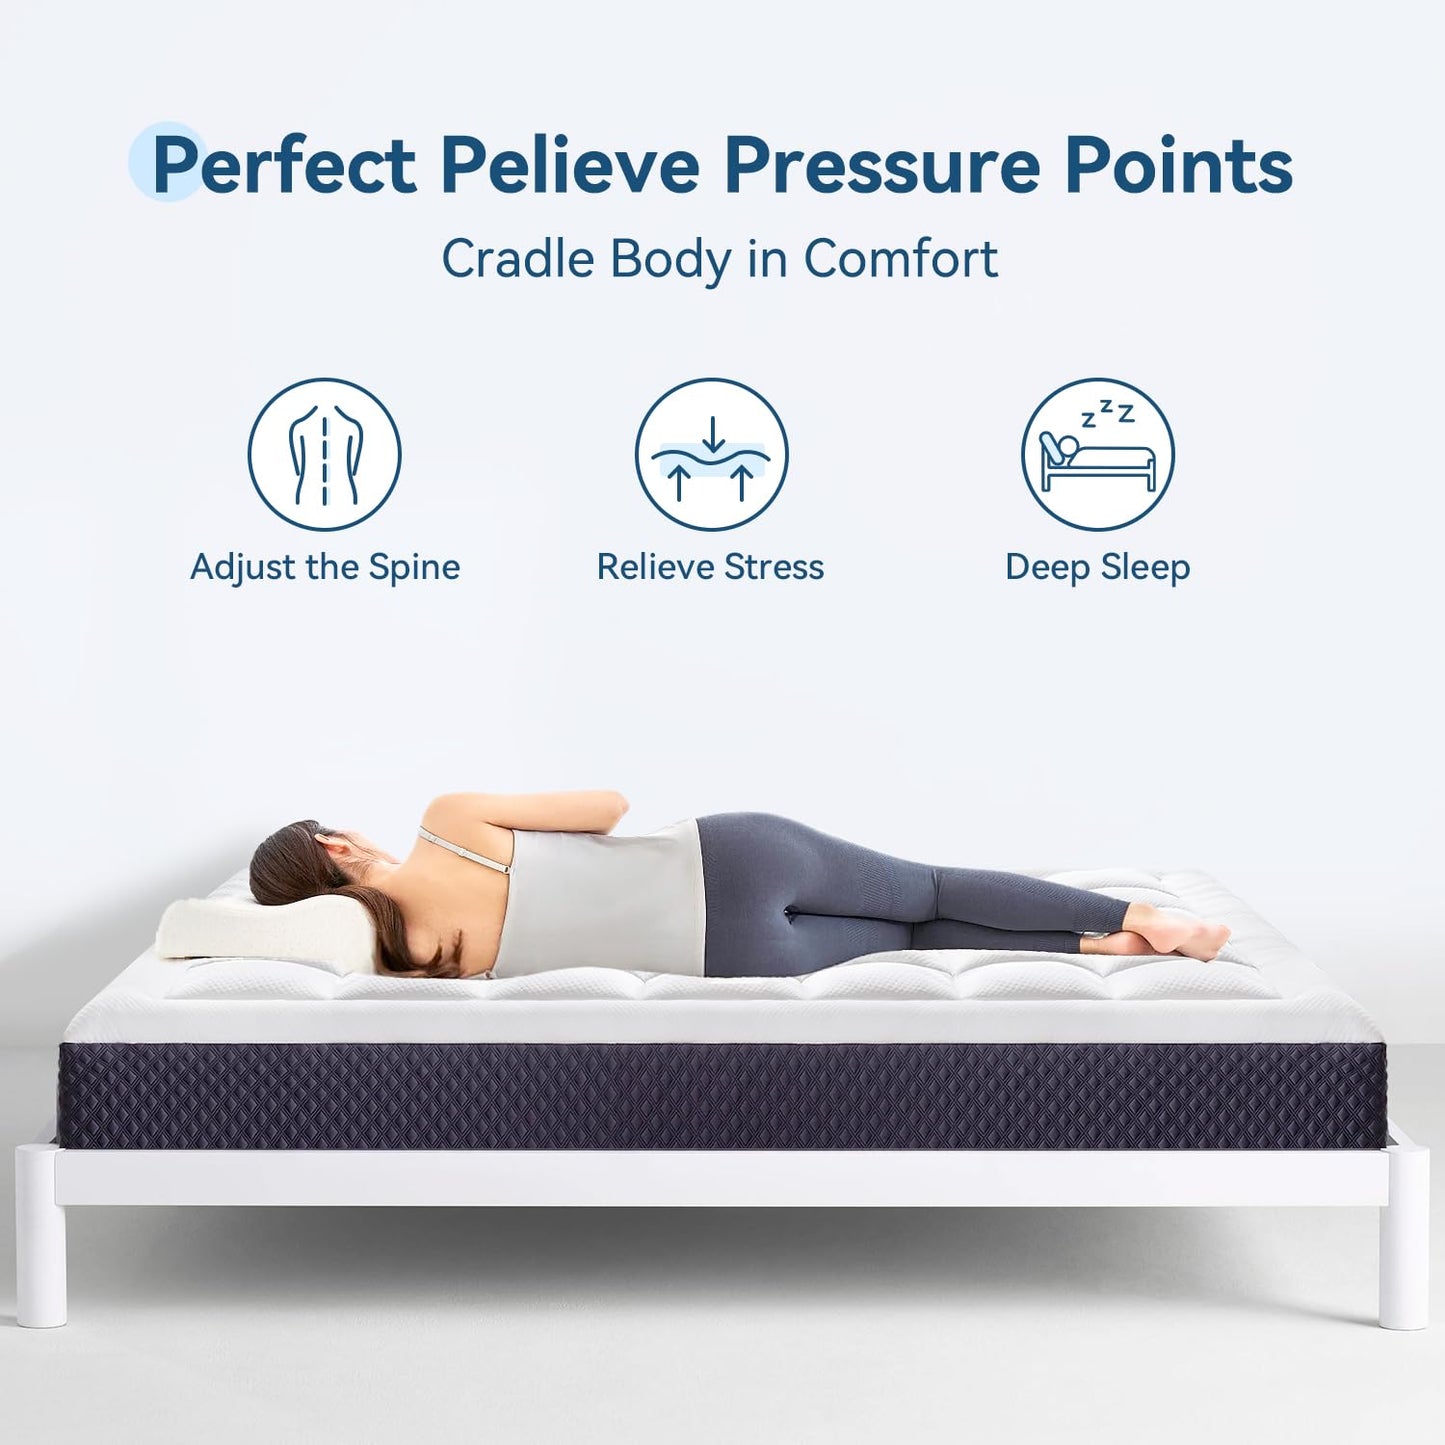 ELEMUSE Twin Mattress 5 Inch Cooling Gel Memory Foam Mattress in a Box for Kids, Plus Pillowtop for Pressure Relief, CertiPUR-US® Certified Bed in a Box for Single Bed, Fiberglass-Free